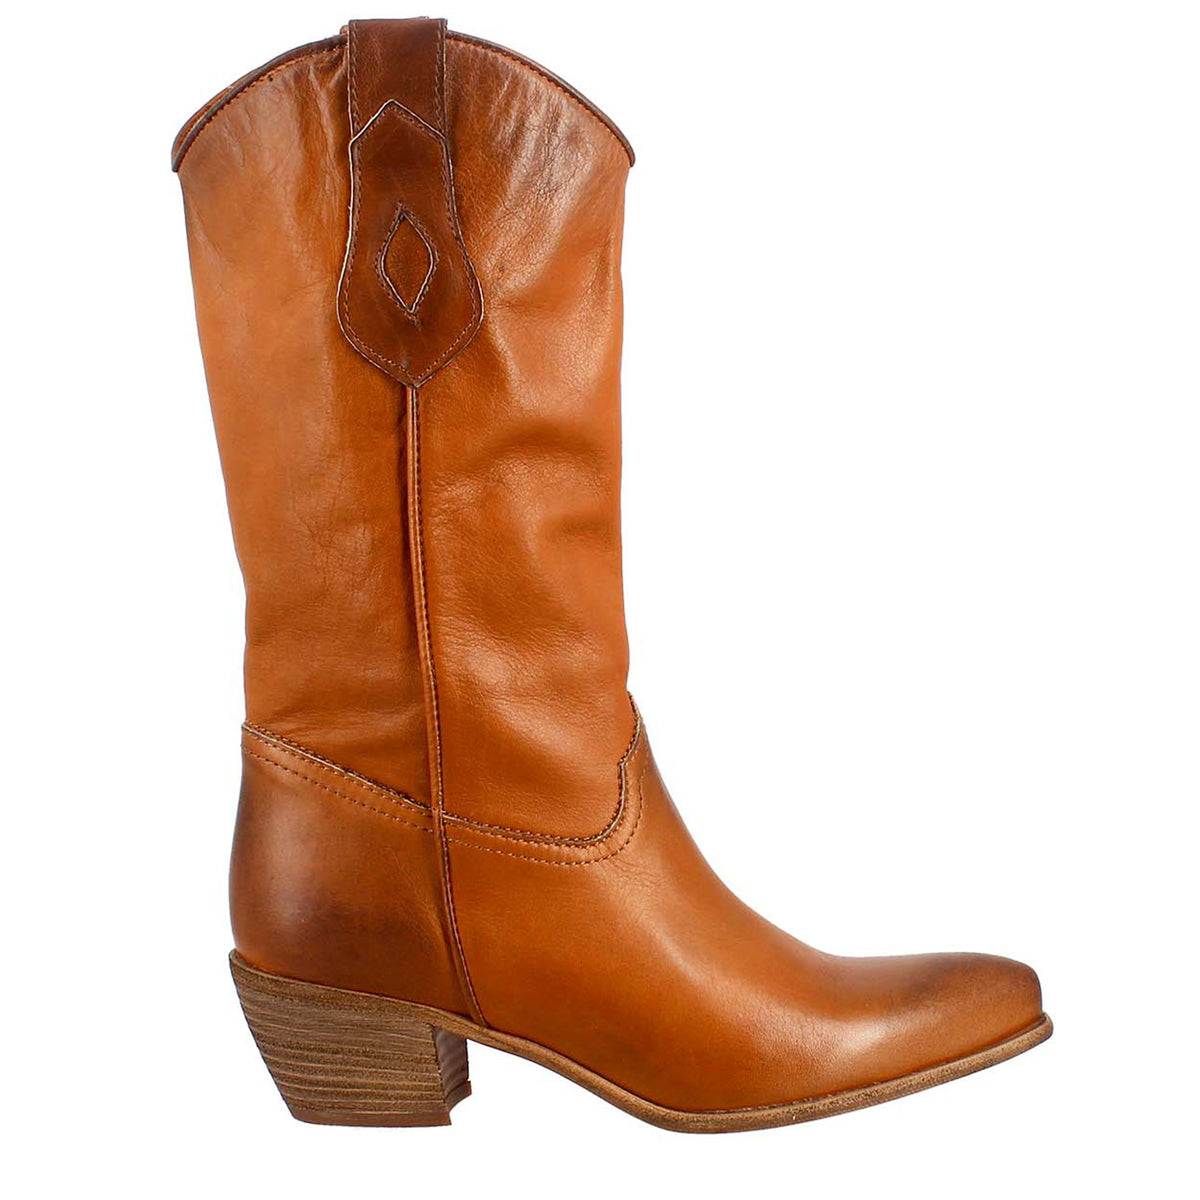 Women's Texan boots unlined in brown vintage leather.